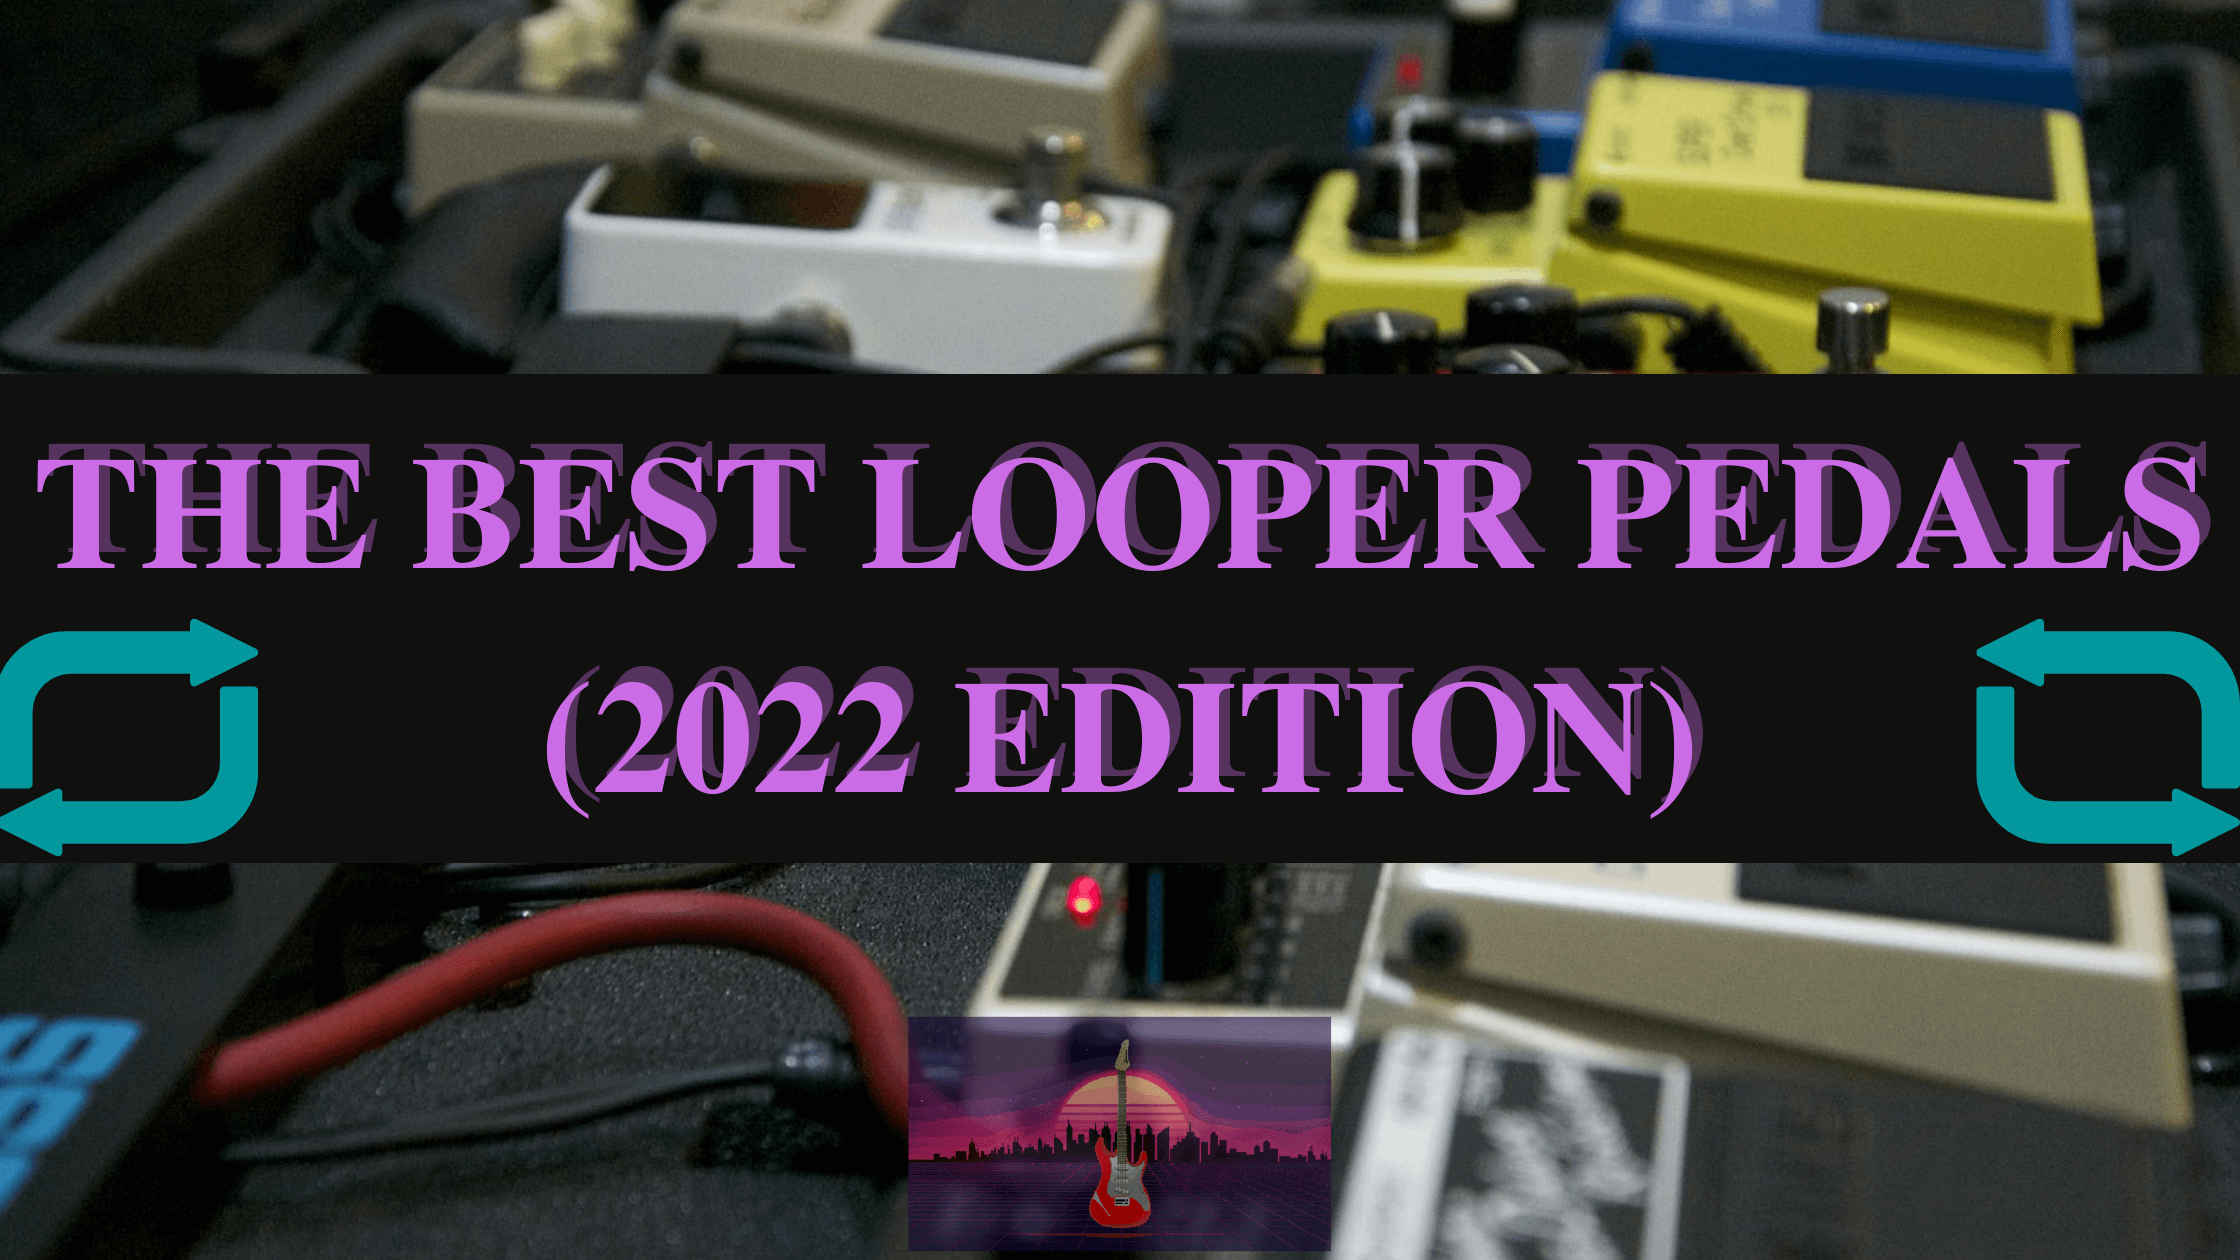 the 5 best guitar loop pedals for the 2022 - choose the best loopers and loop stations for your signal chain!